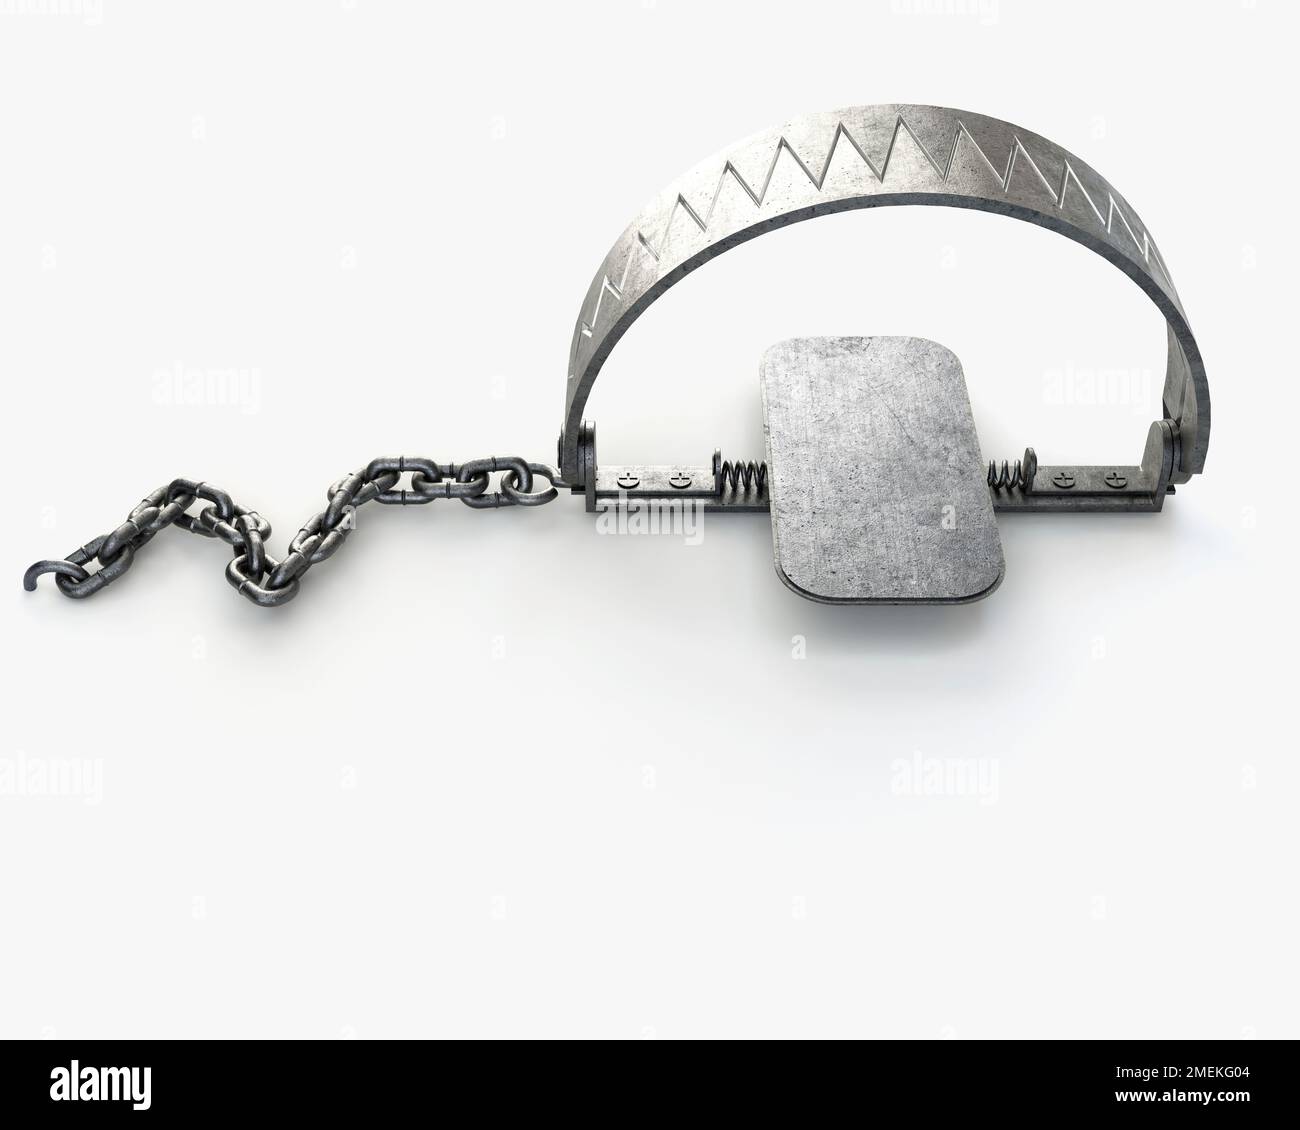 https://c8.alamy.com/comp/2MEKG04/a-shut-metal-animal-hunting-trap-attached-to-the-ground-with-a-metal-chain-on-an-isolated-studio-background-3d-render-2MEKG04.jpg